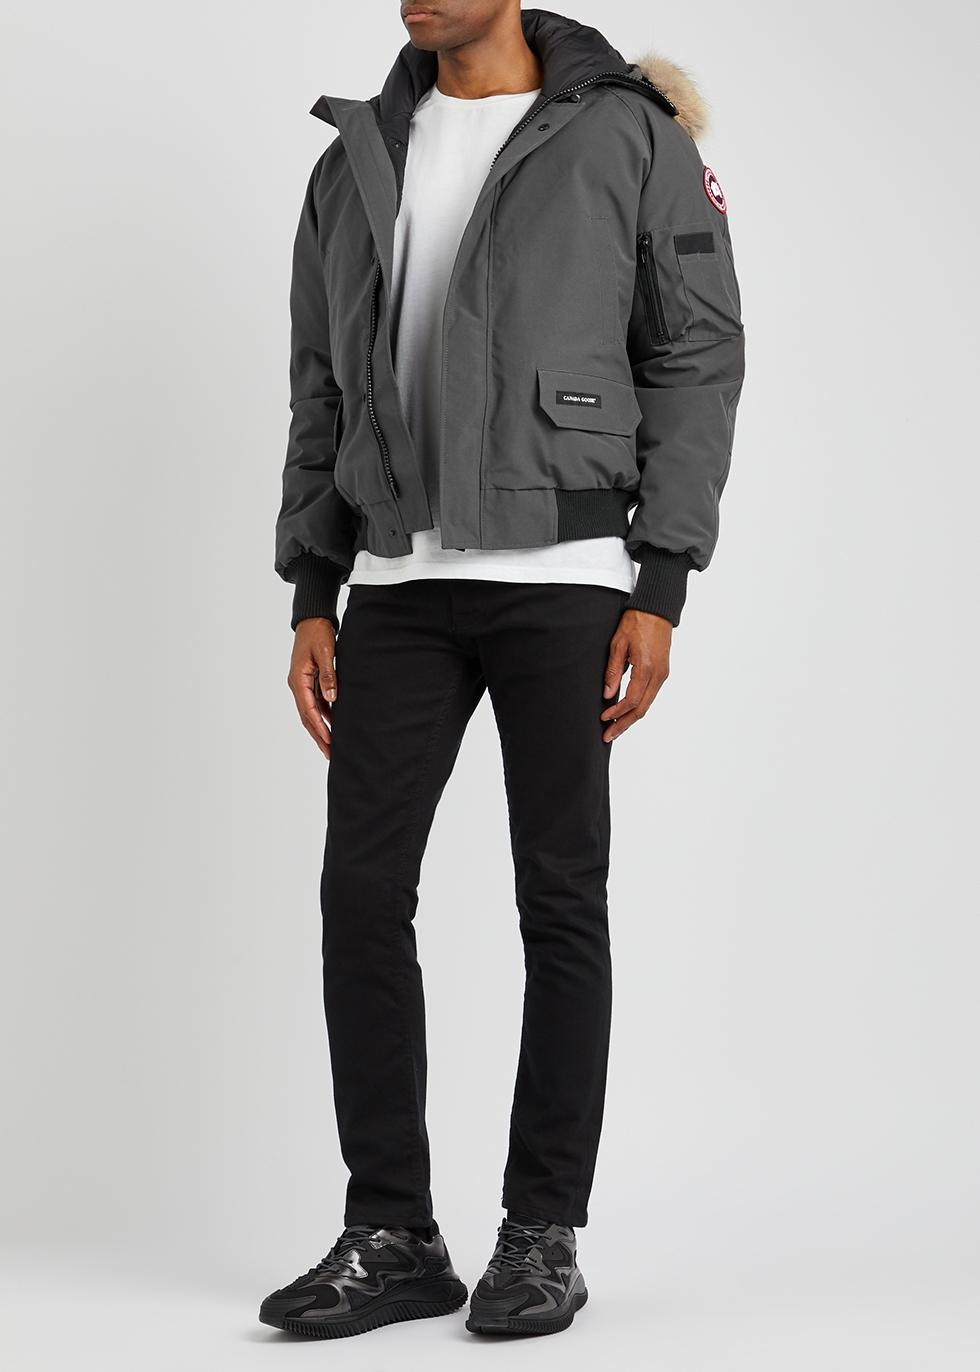 Canada Goose Chilliwack Fur-trimmed Arctic-tech Bomber Jacket in Gray for  Men